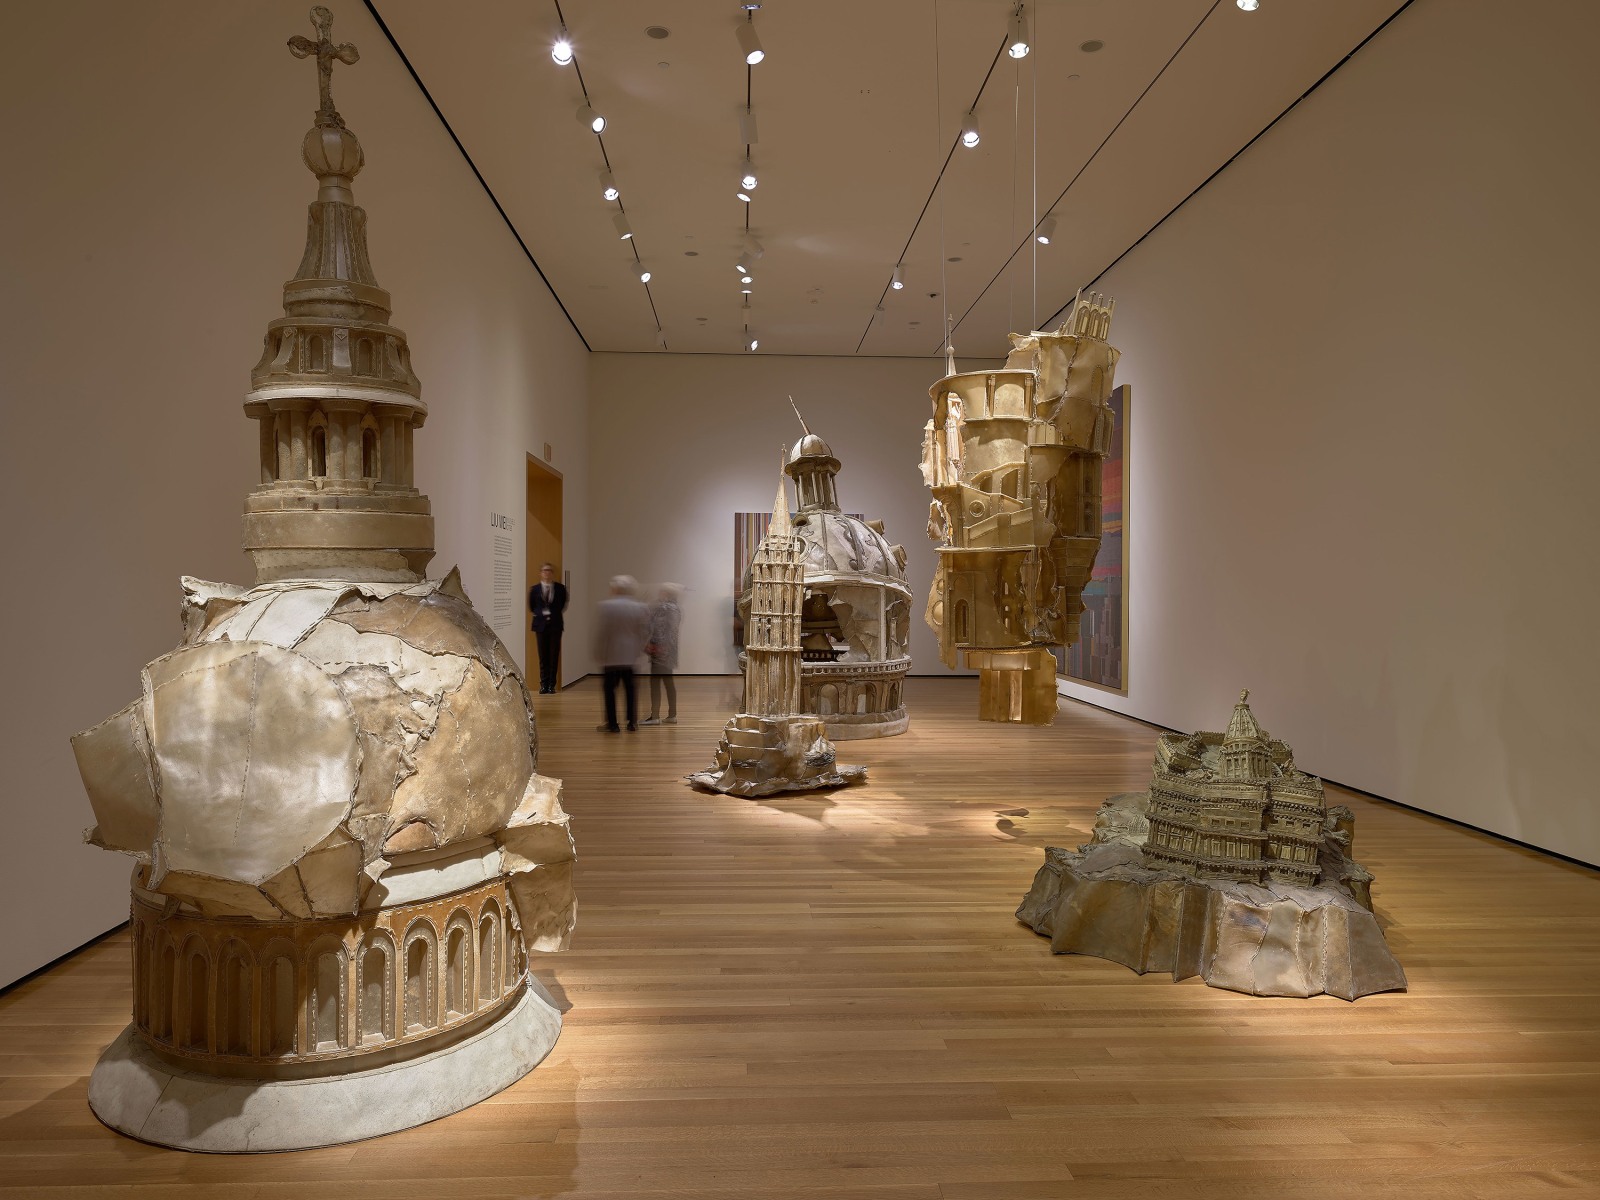 View 3 of Liu Wei's solo museum exhibition titled Invisible Cities at the Cleveland Museum of Art